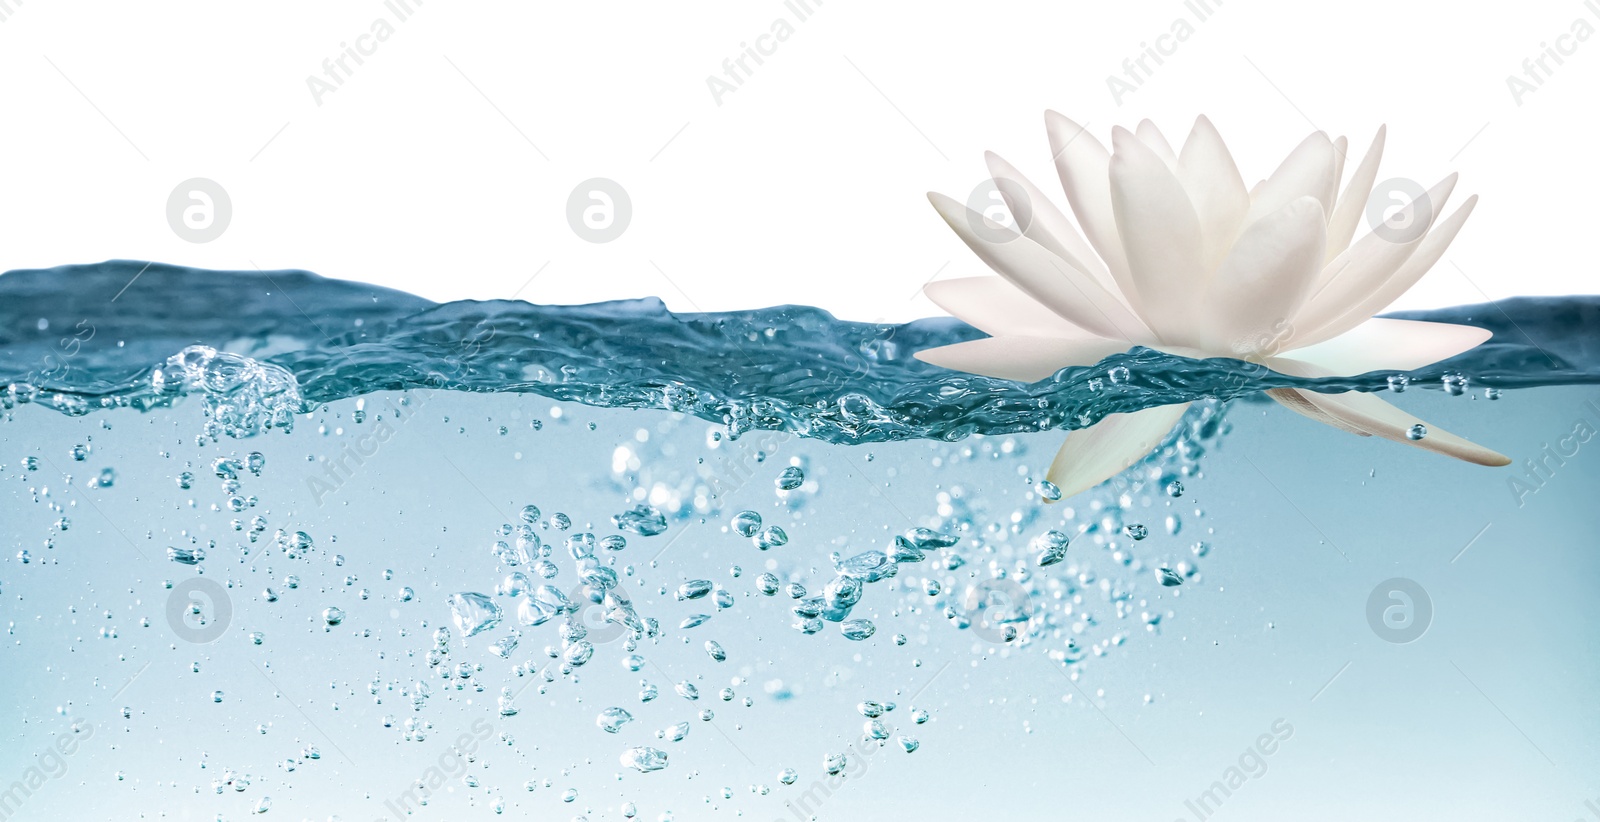 Image of Beautiful lotus flower on water against white background